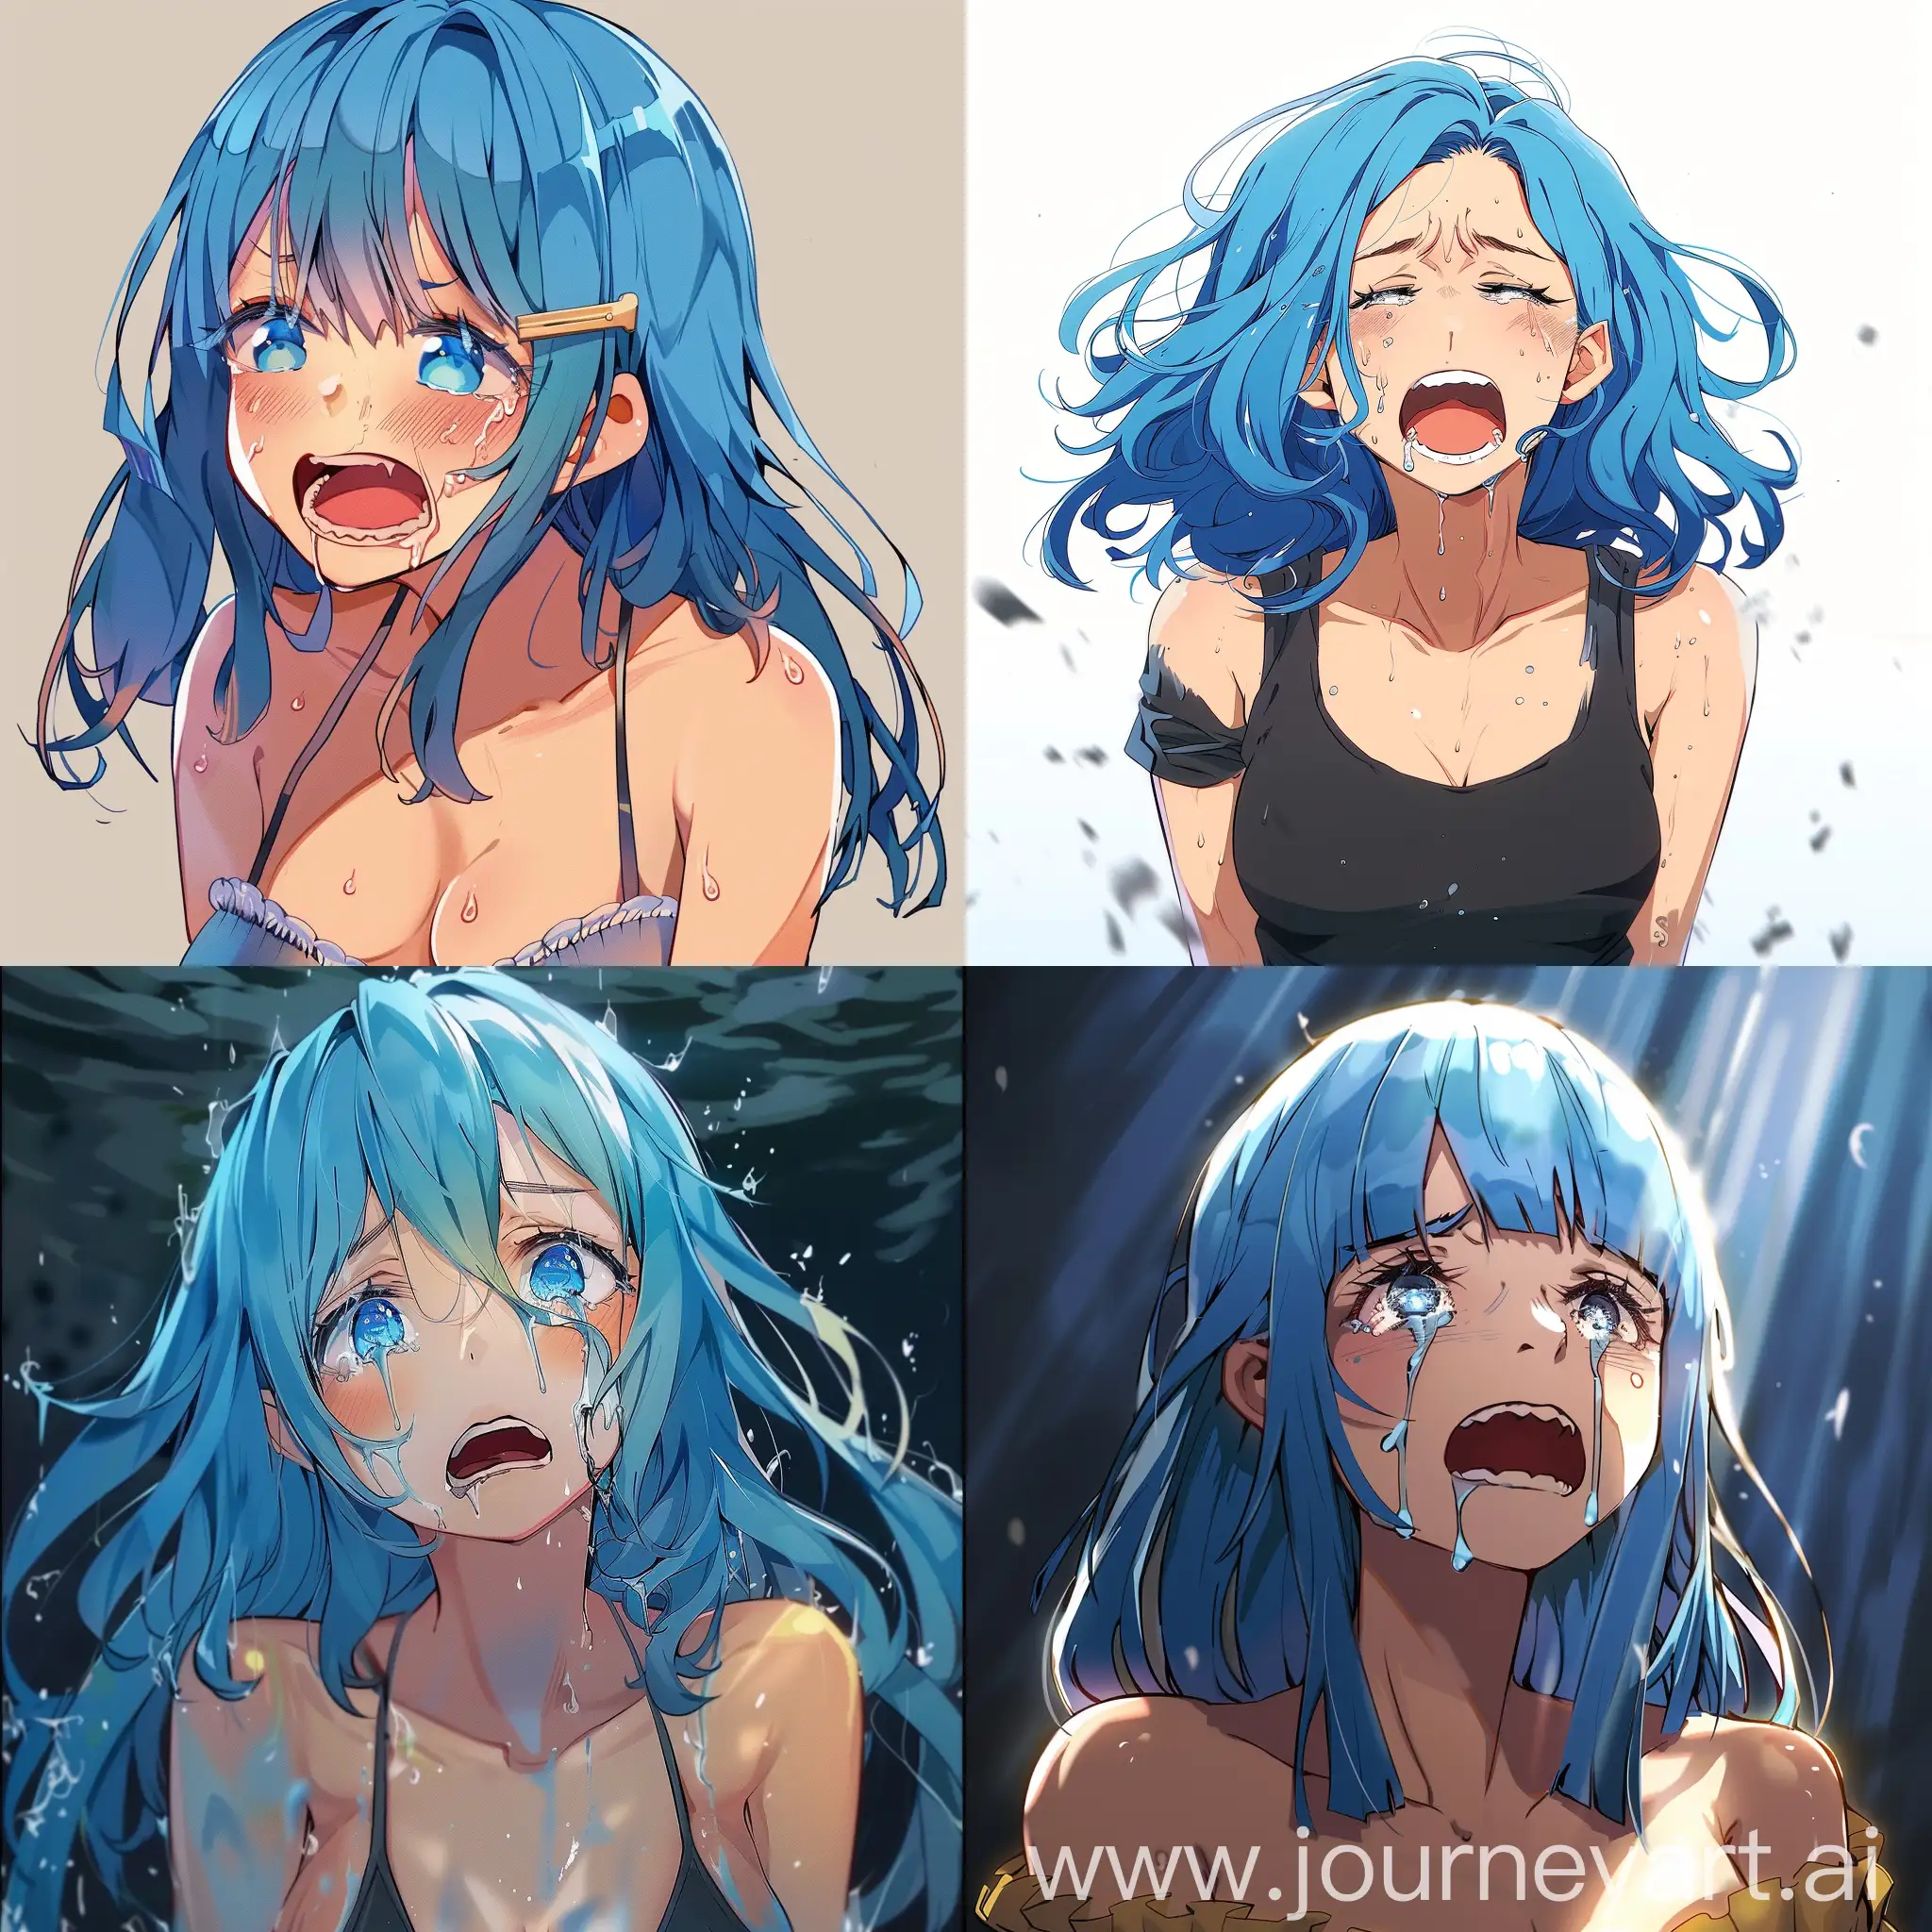 Anime girl crying with blue hair and exciting body